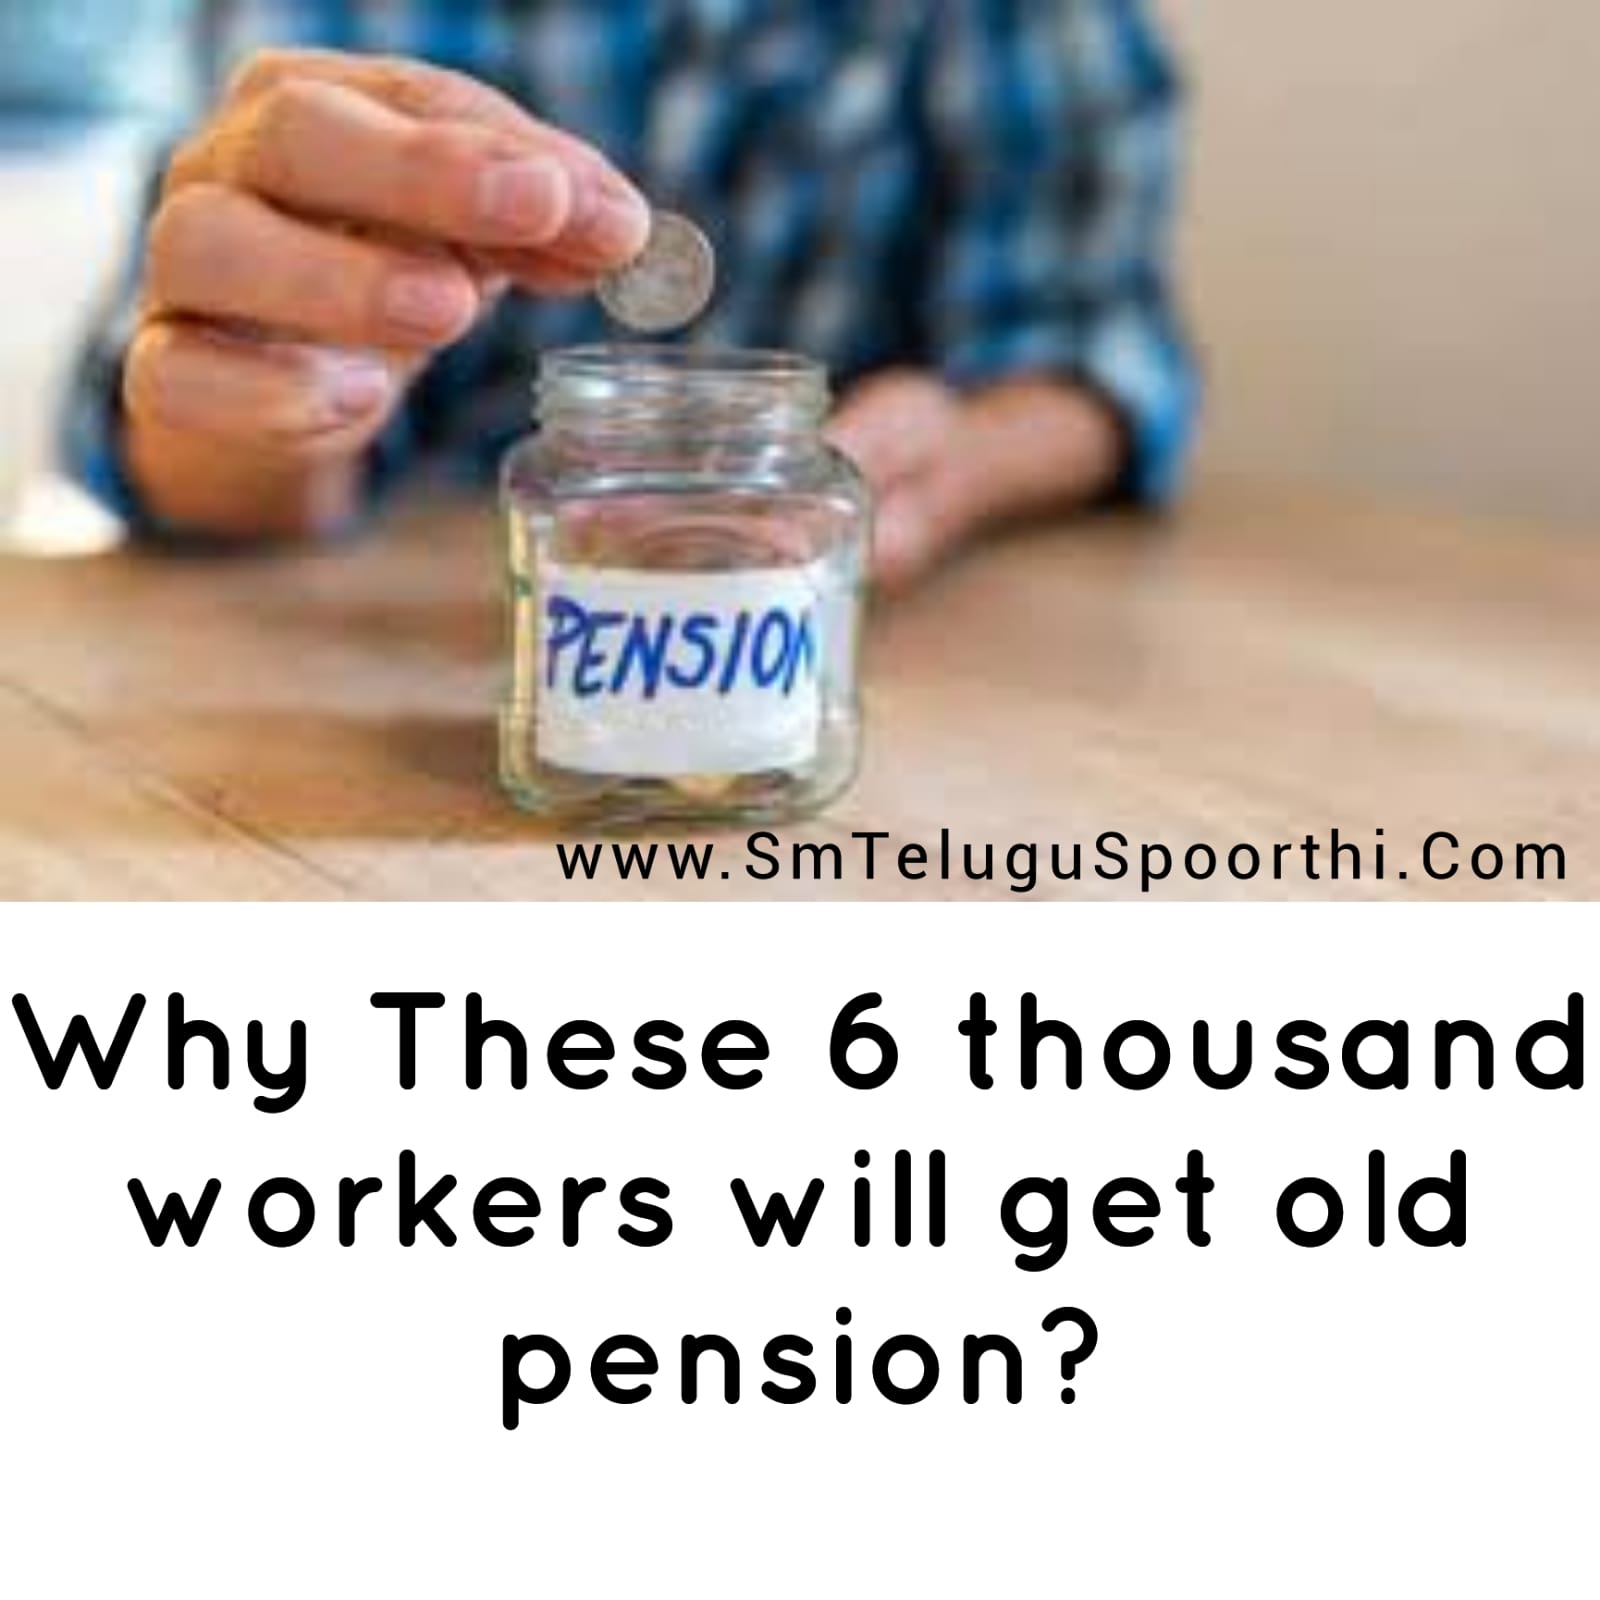 Why These 6 thousand workers will get old pension?